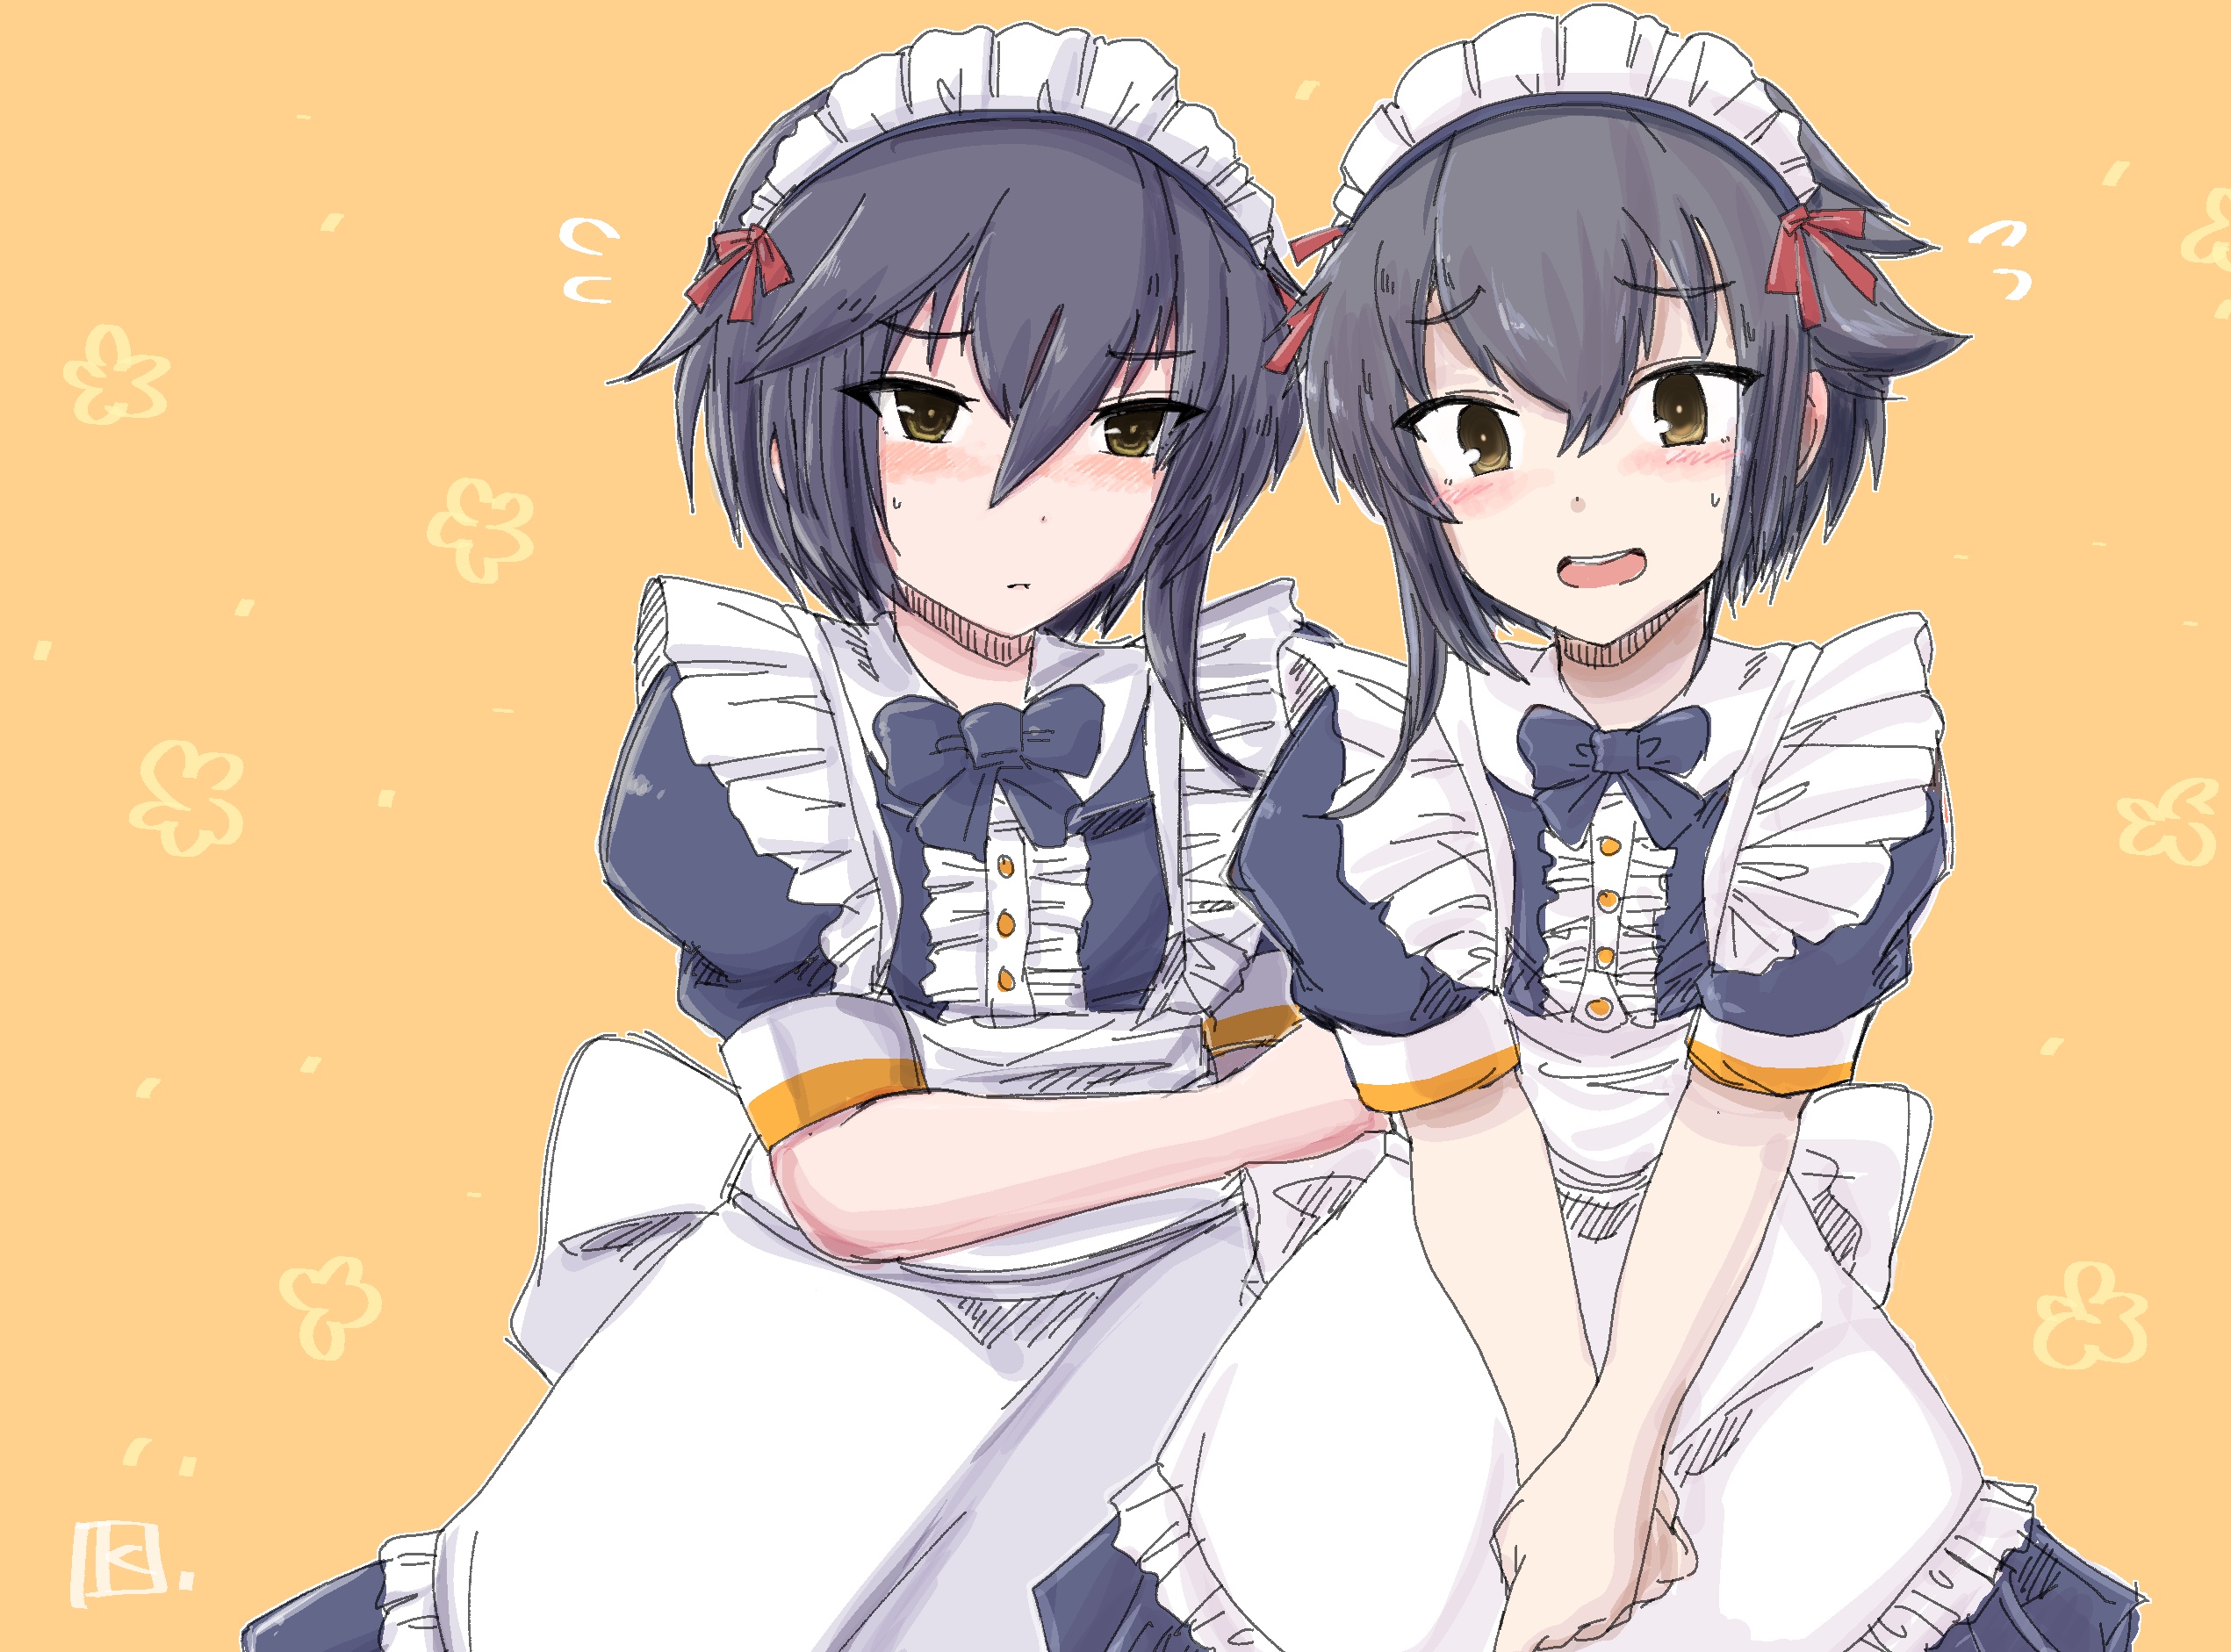 Anime Anime Girls Kantai Collection I 13 KanColle I 14 KanColle Twins Maid Maid Outfit Short Hair Bl 2541x1882